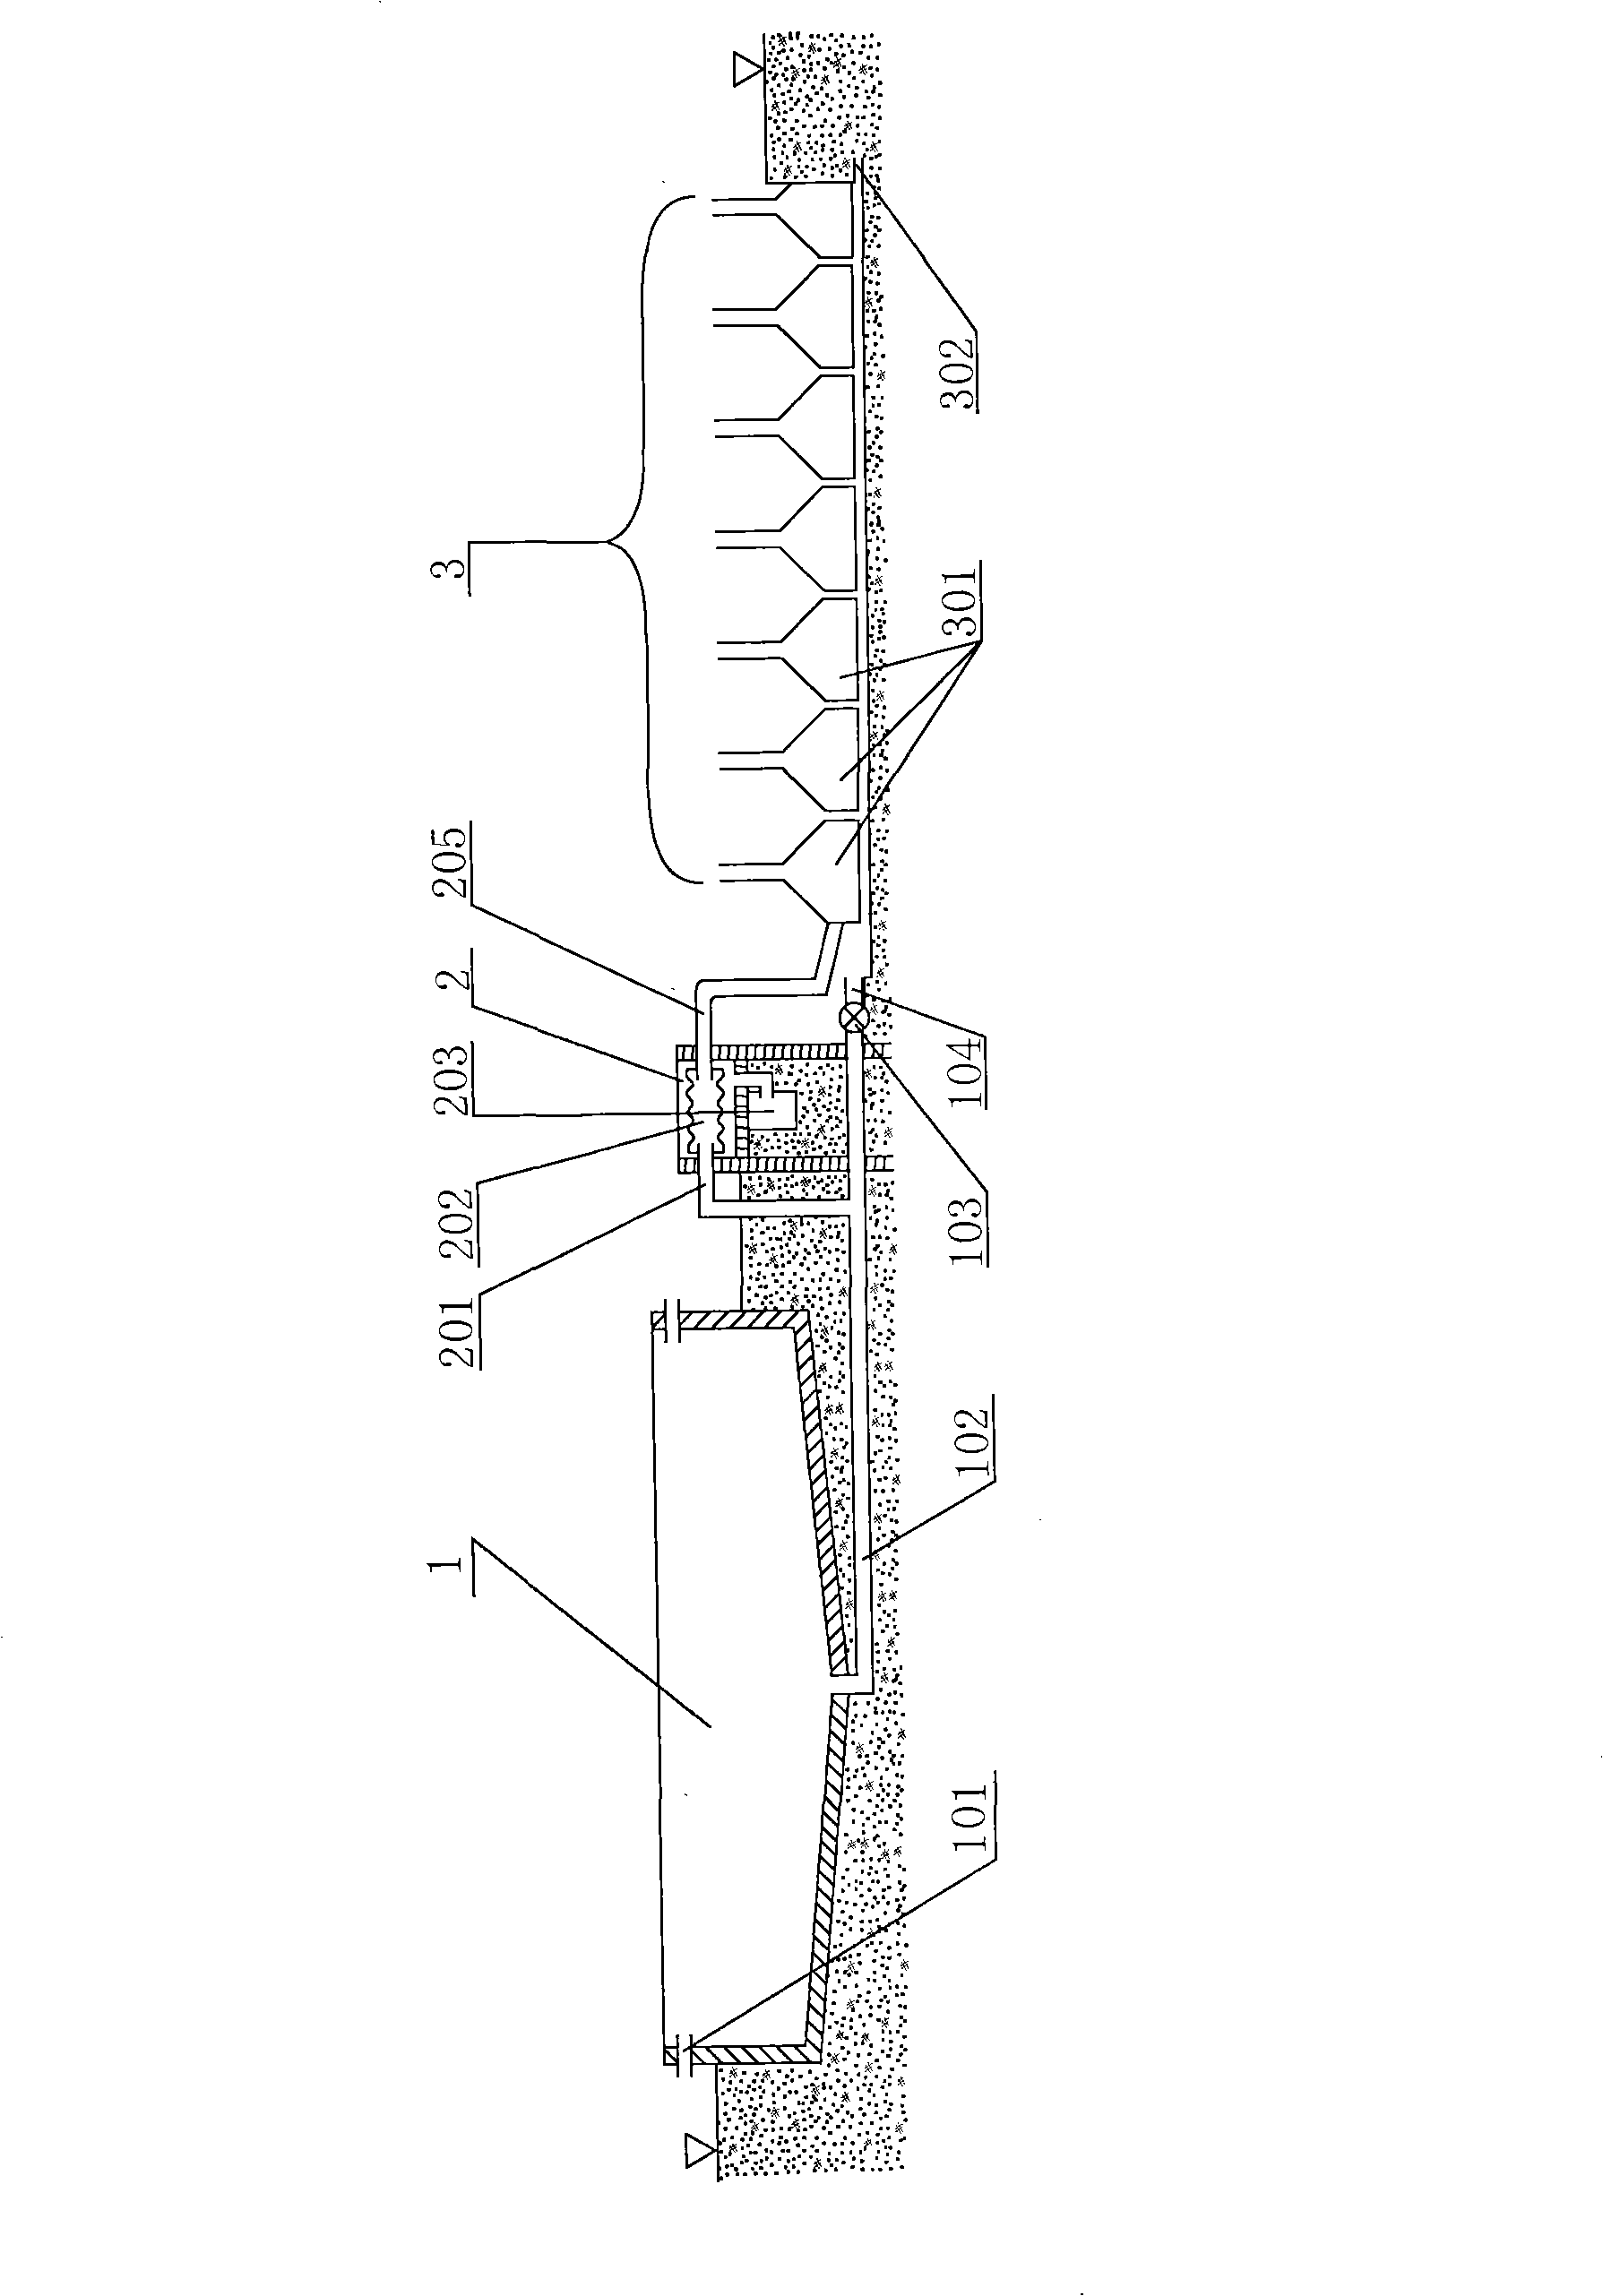 Device and method for automatically collecting fish-egg